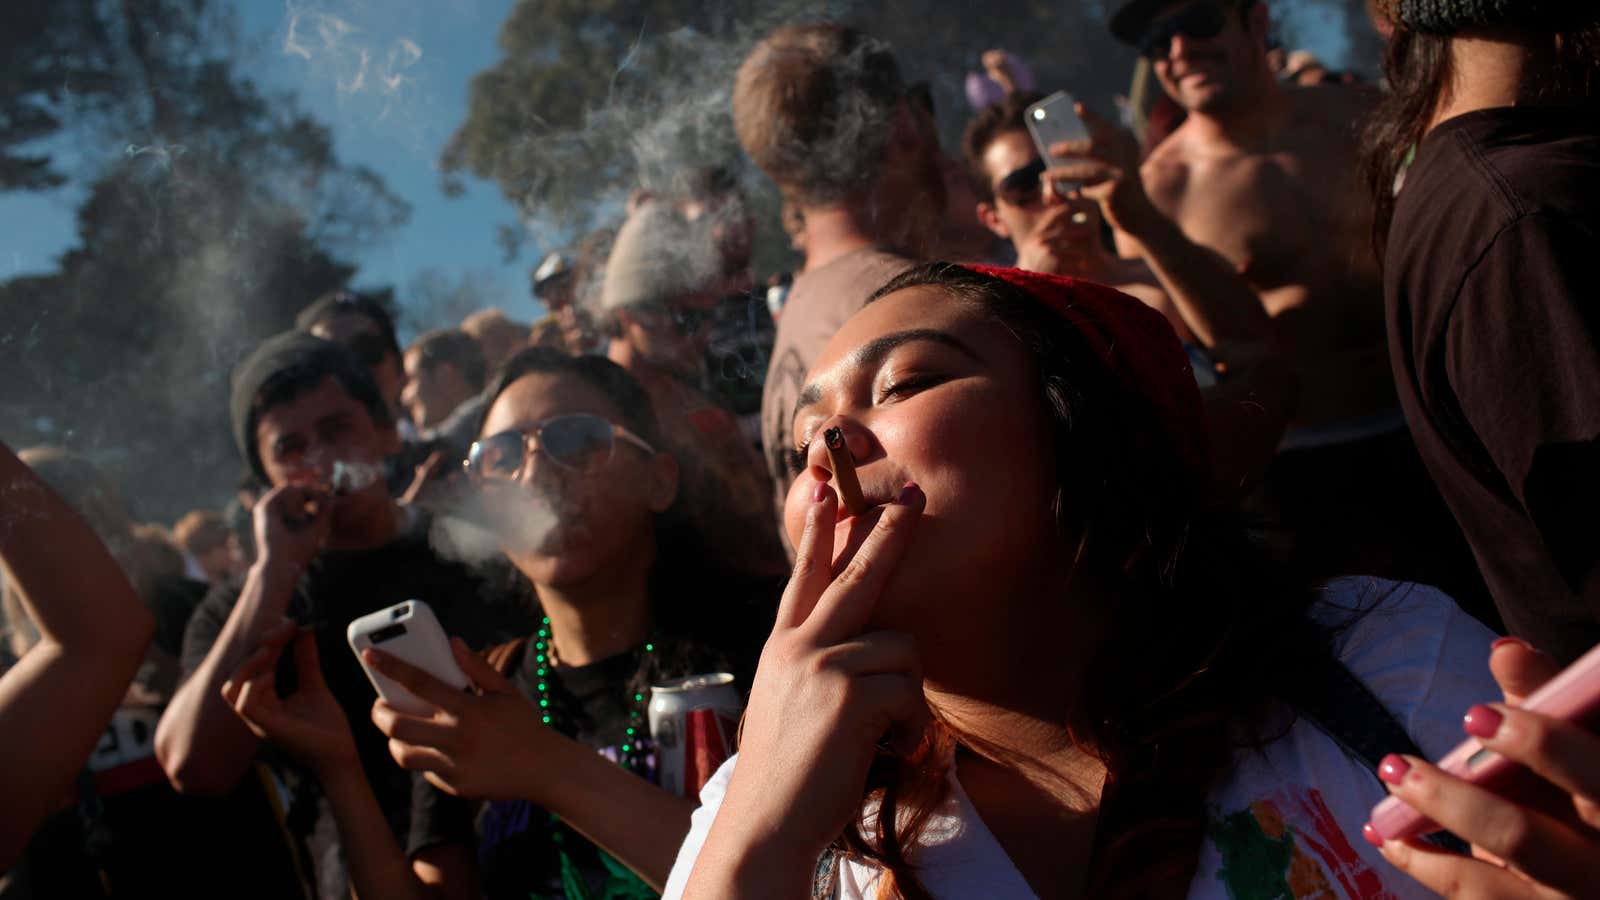 More Americans are smoking marijuana than tobacco cigarettes now